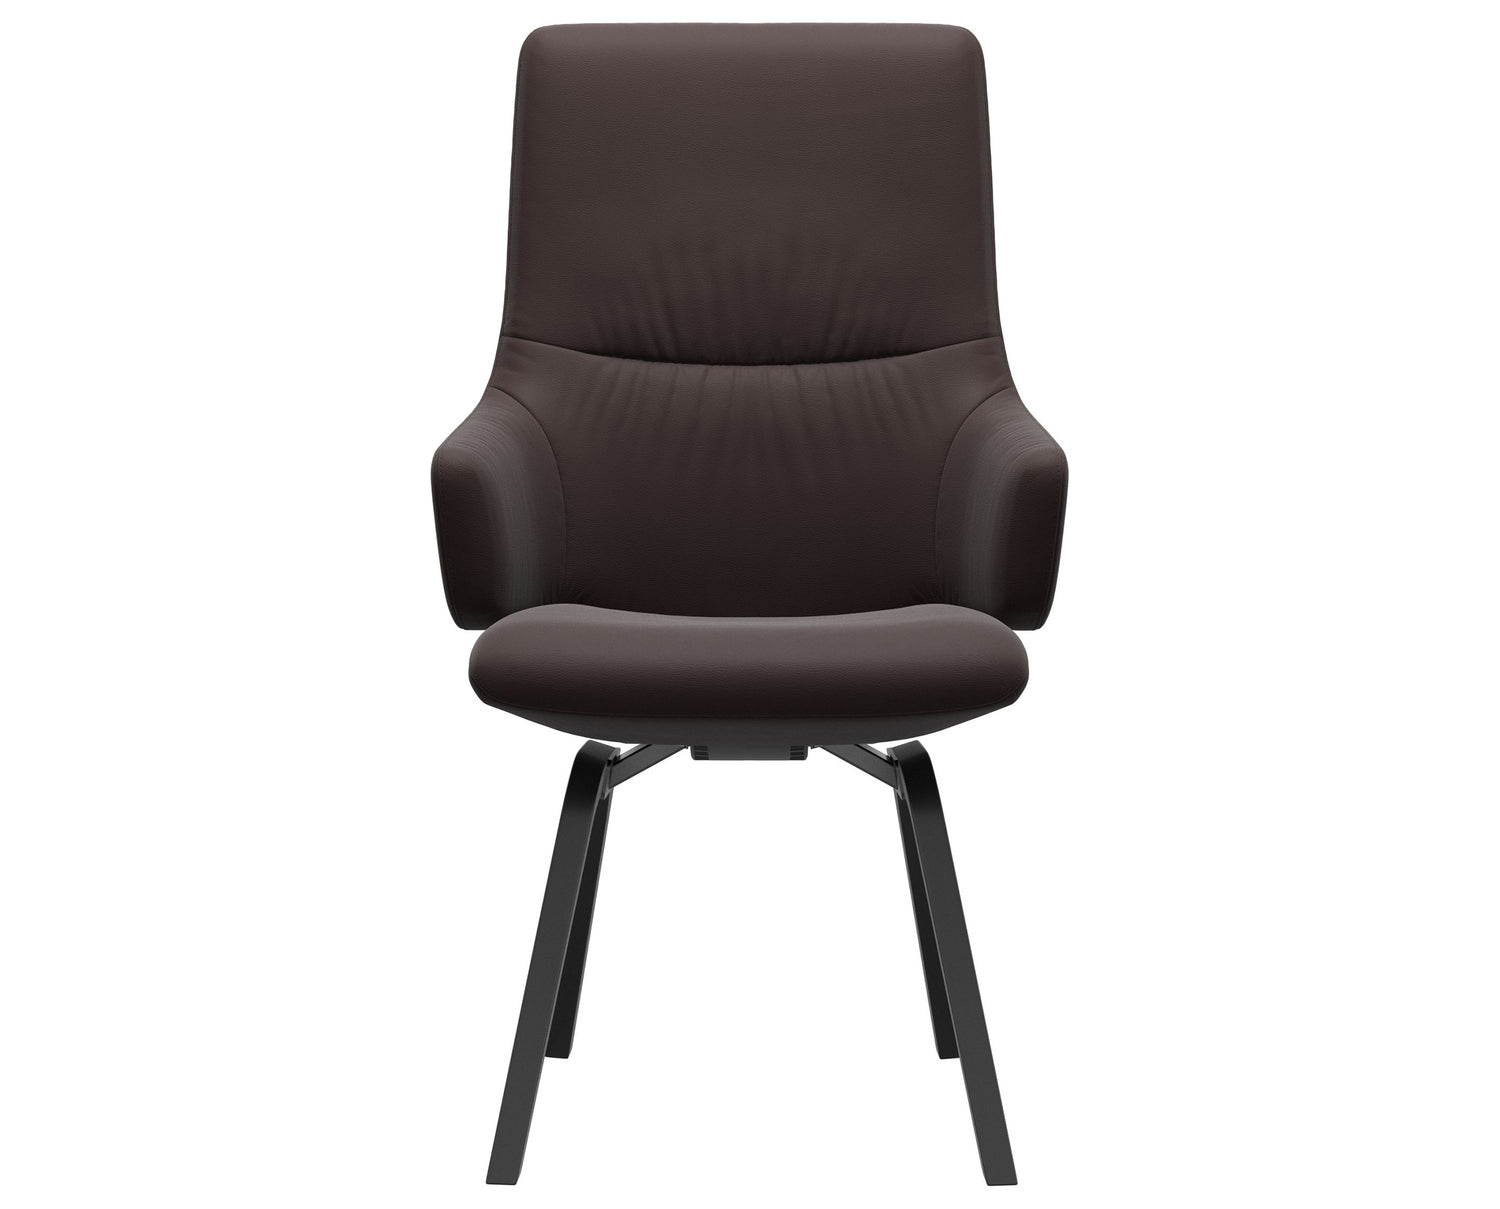 Paloma Leather Chocolate & Black Base | Stressless Mint High Back D200 Dining Chair w/Arms | Valley Ridge Furniture